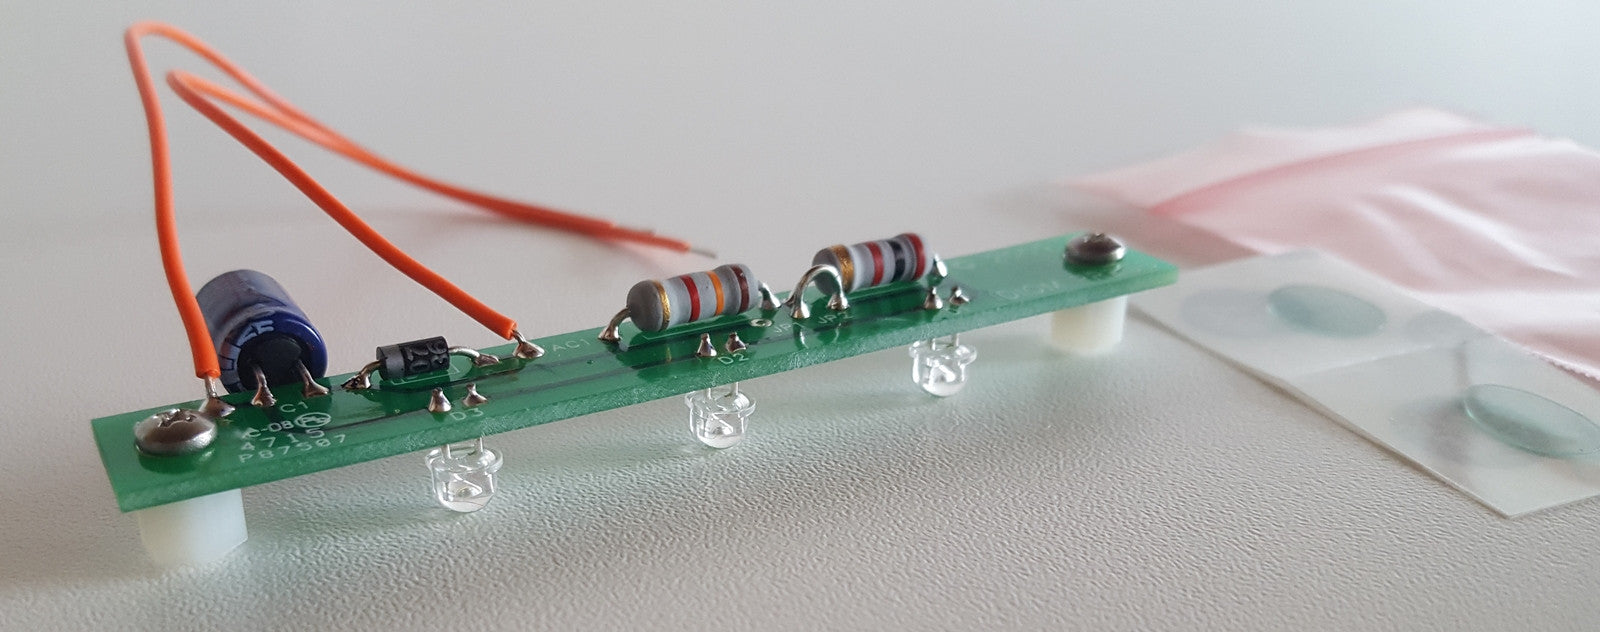 The Rotator Illuminator Assembled/Tested unit by Ham Supply / Idiom Press is a three-LED replacement circuit for the incandescent lamp in Hy-Gain control boxes.